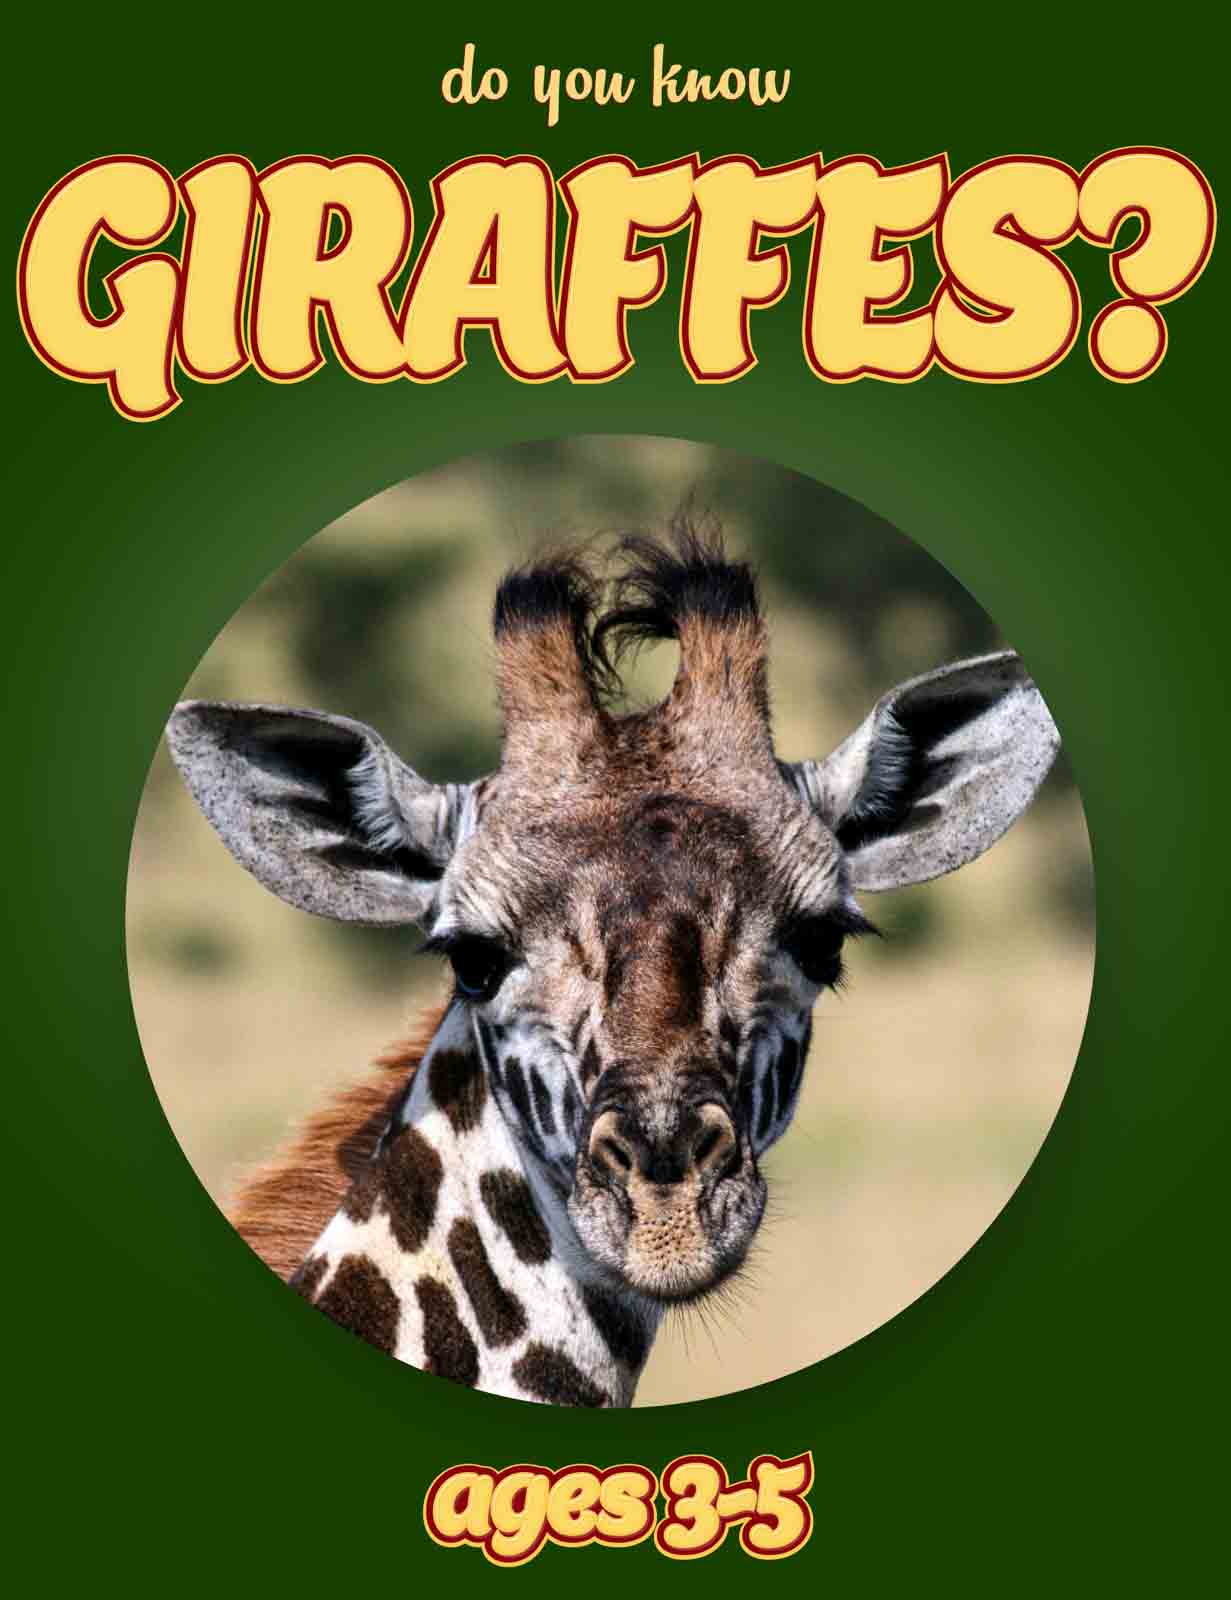 Giraffe Facts For Kids Ages 3 5 Do You Know Giraffes